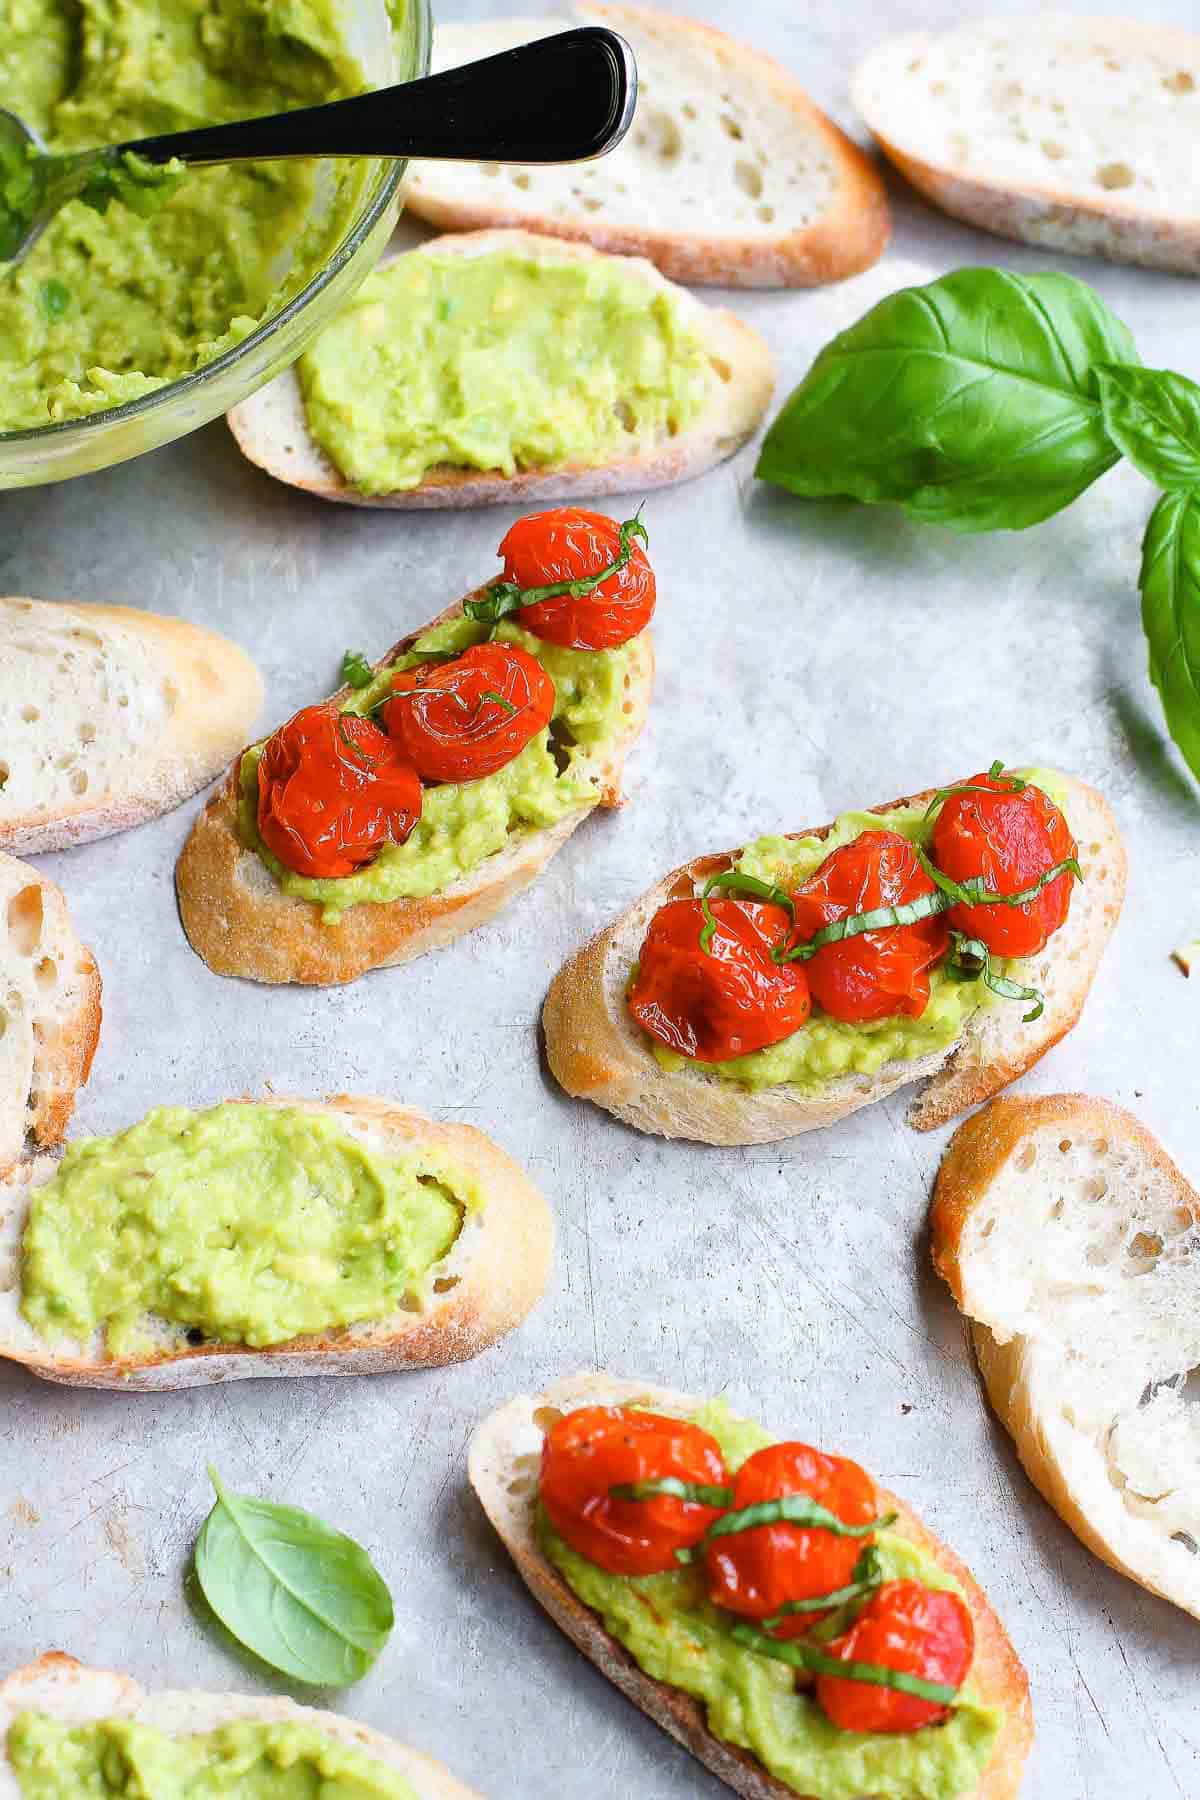 Toasted baguette slices, topped with mashed avocado and cooked tomatoes.